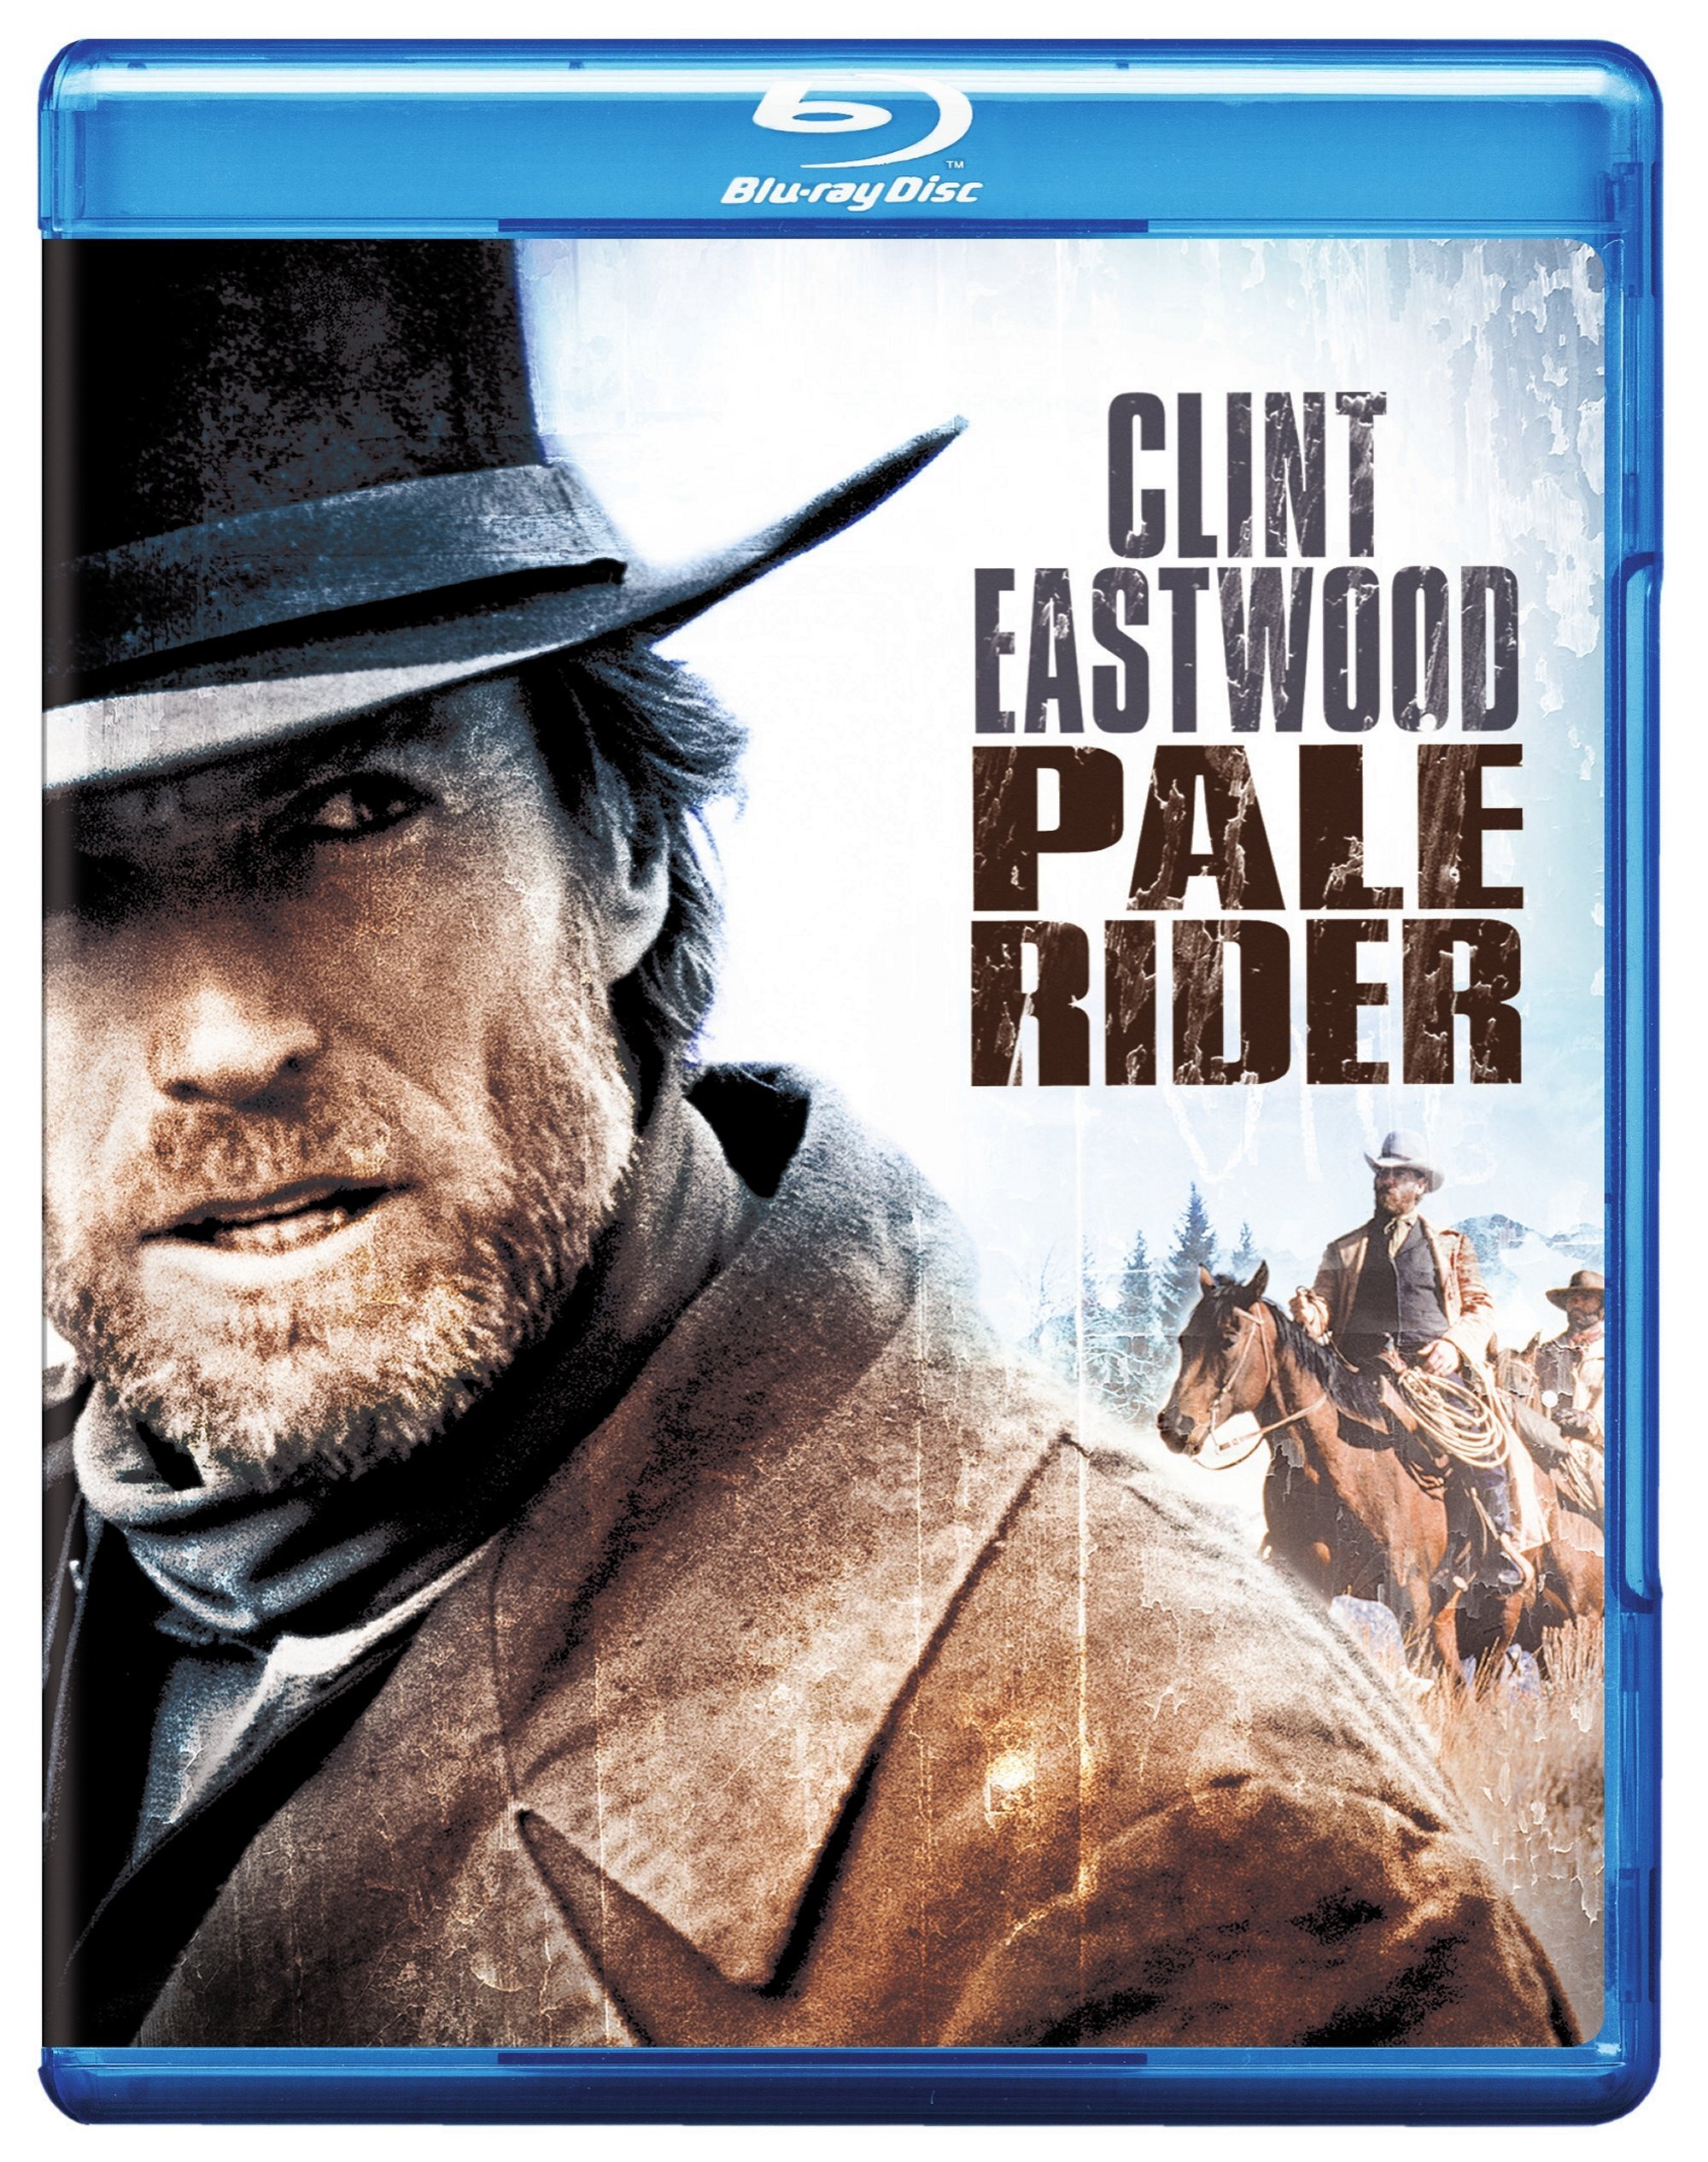 Pale Rider (Blu-ray New Packaging) - Blu-ray [ 1985 ]  - Western Movies On Blu-ray - Movies On GRUV